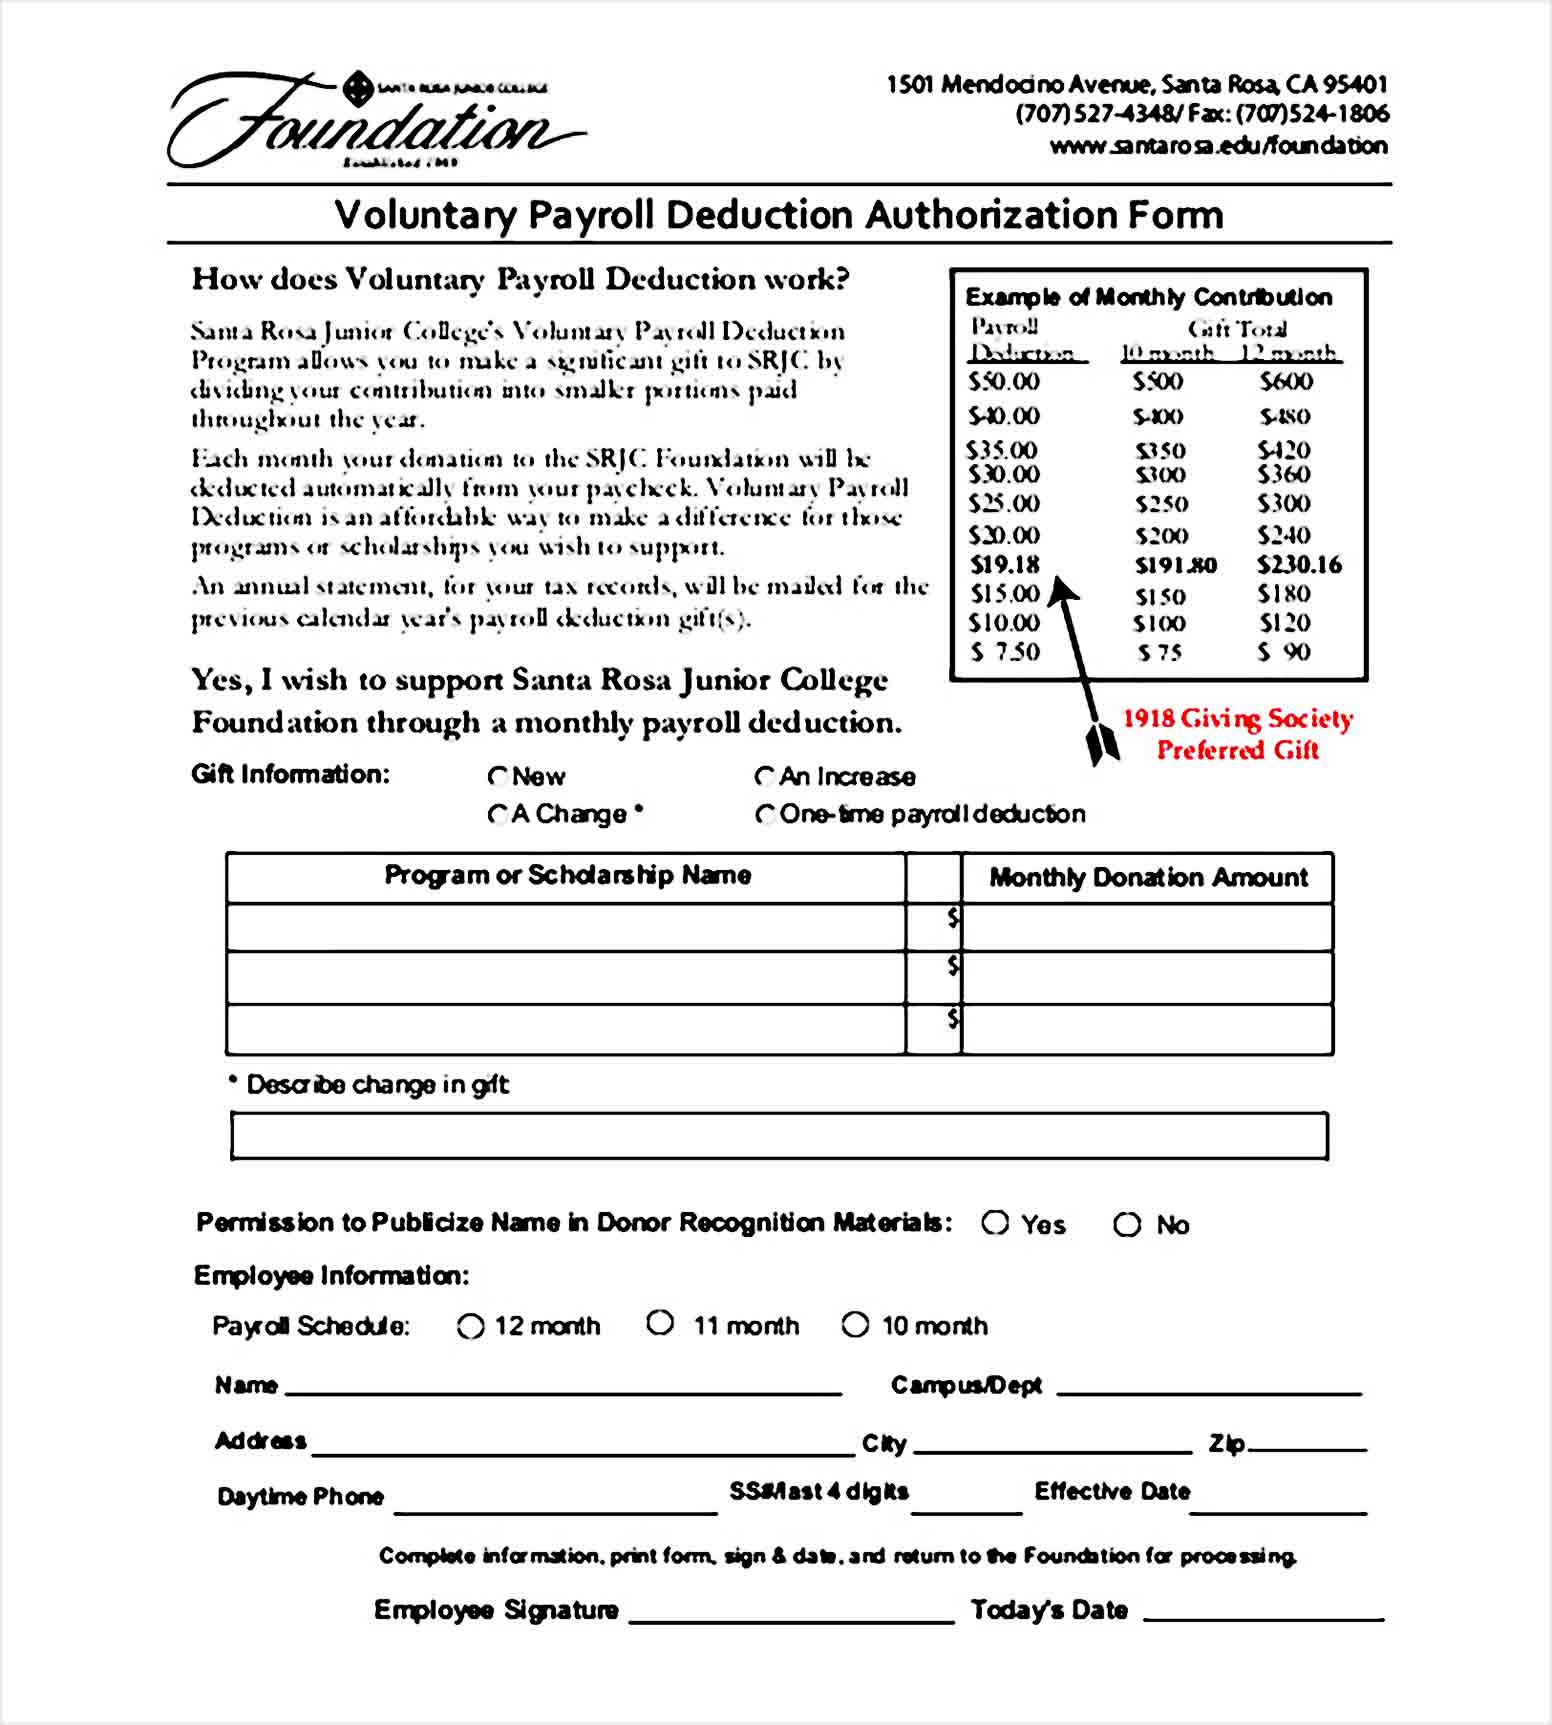 Authorization for Voluntary Payroll Deduction Form